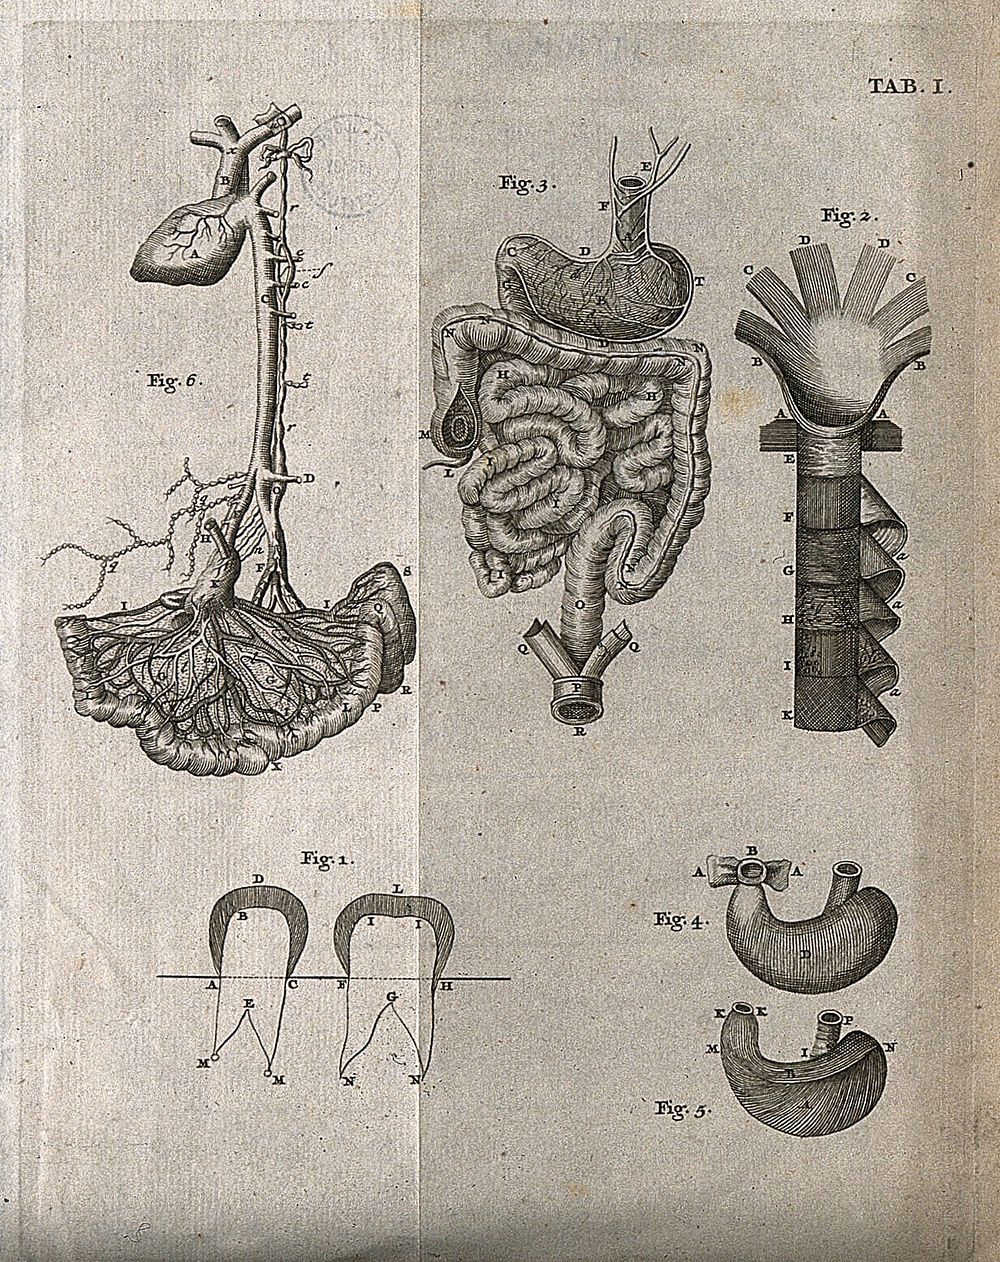 The digestive system. Engraving, 18th century.